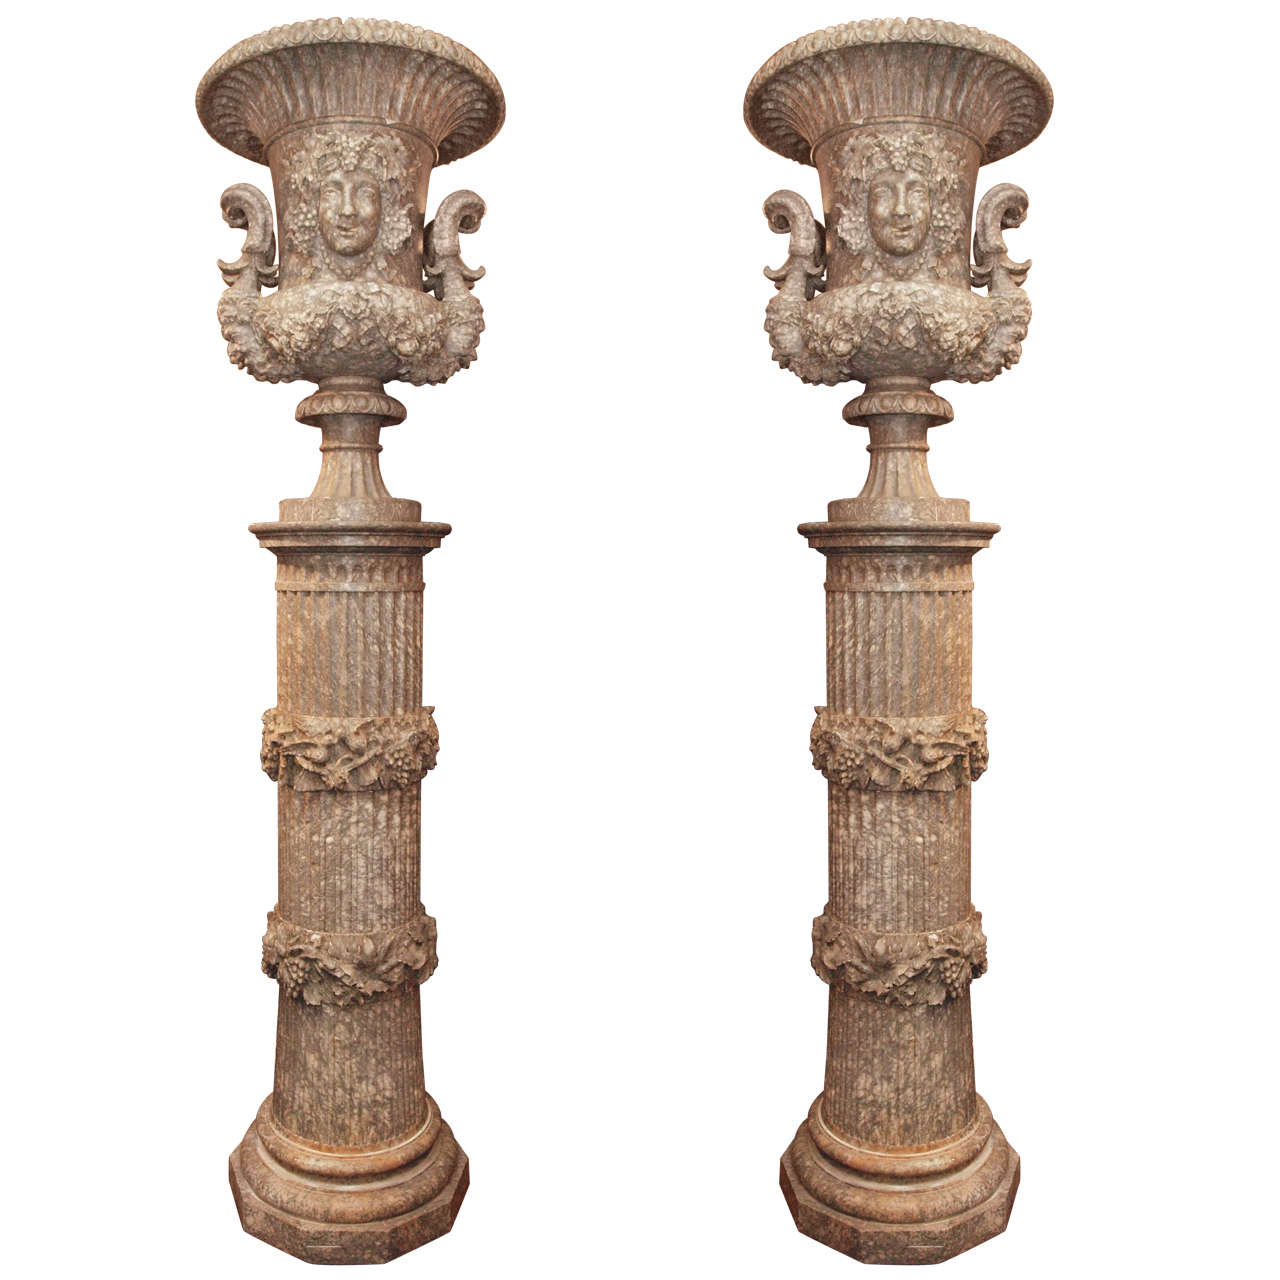 Pair of Antique Grand Sized Columns, Carved in " Marble of the Pyrenees"